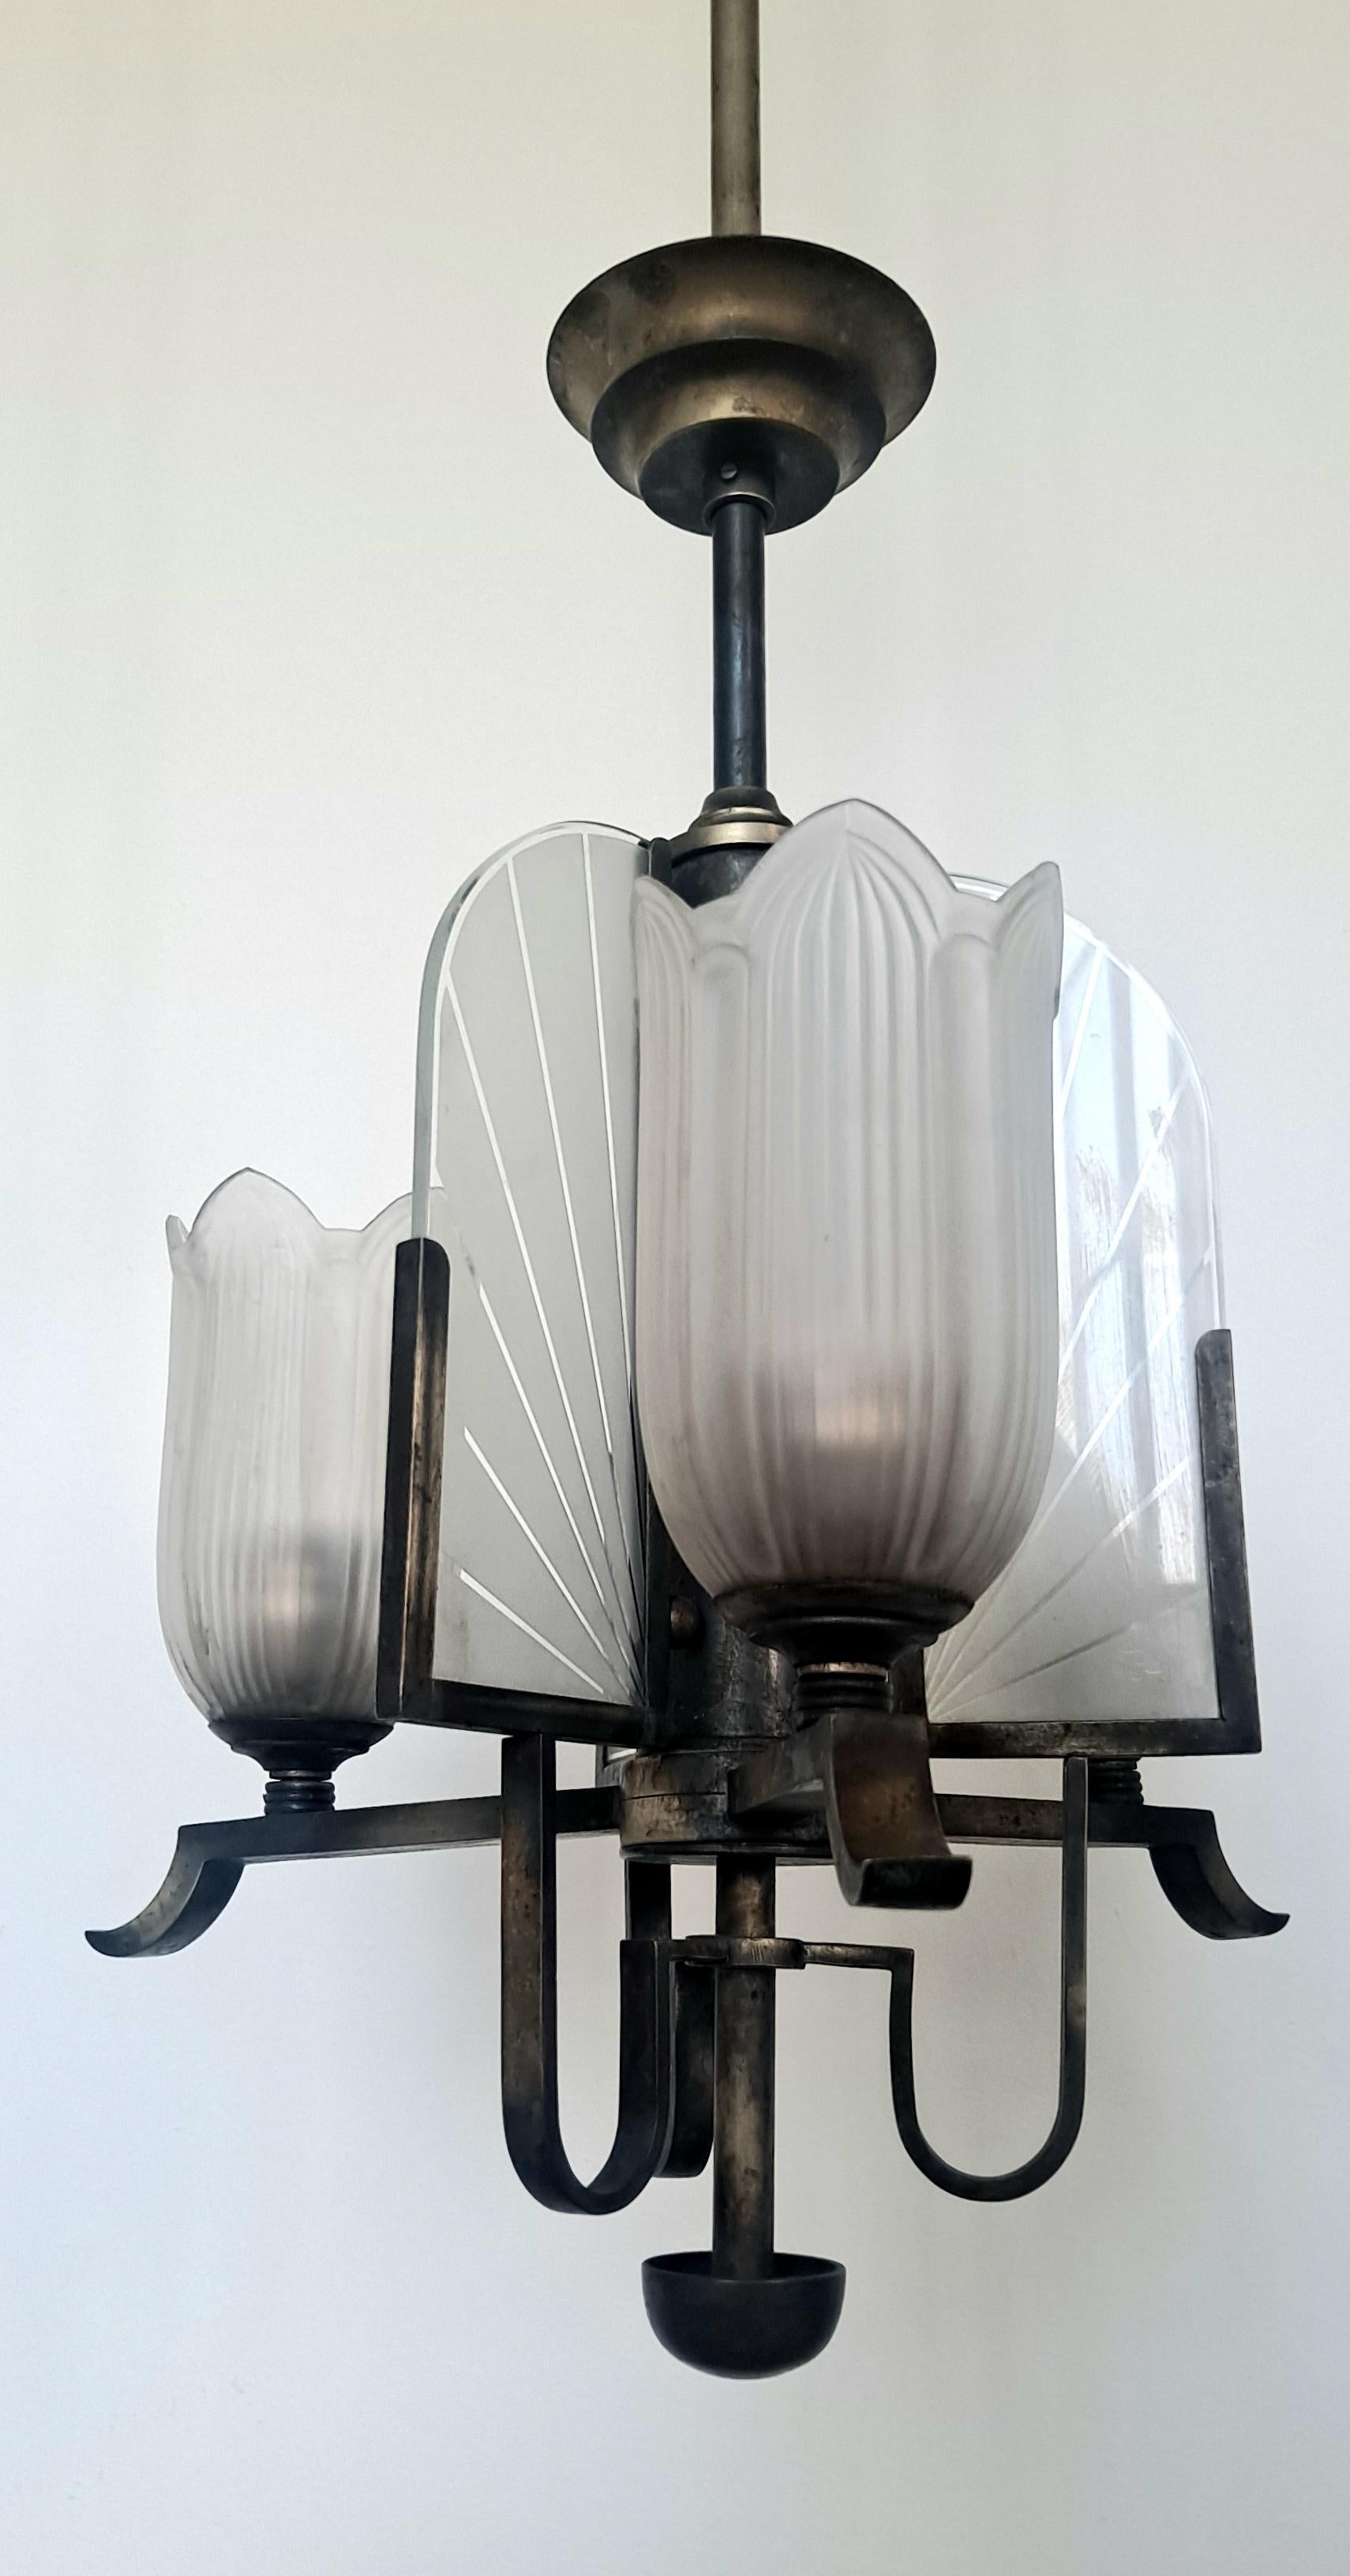 Chandelier is original from the Art Deco period we did not alternate or rewire.
We can rewire it for you.